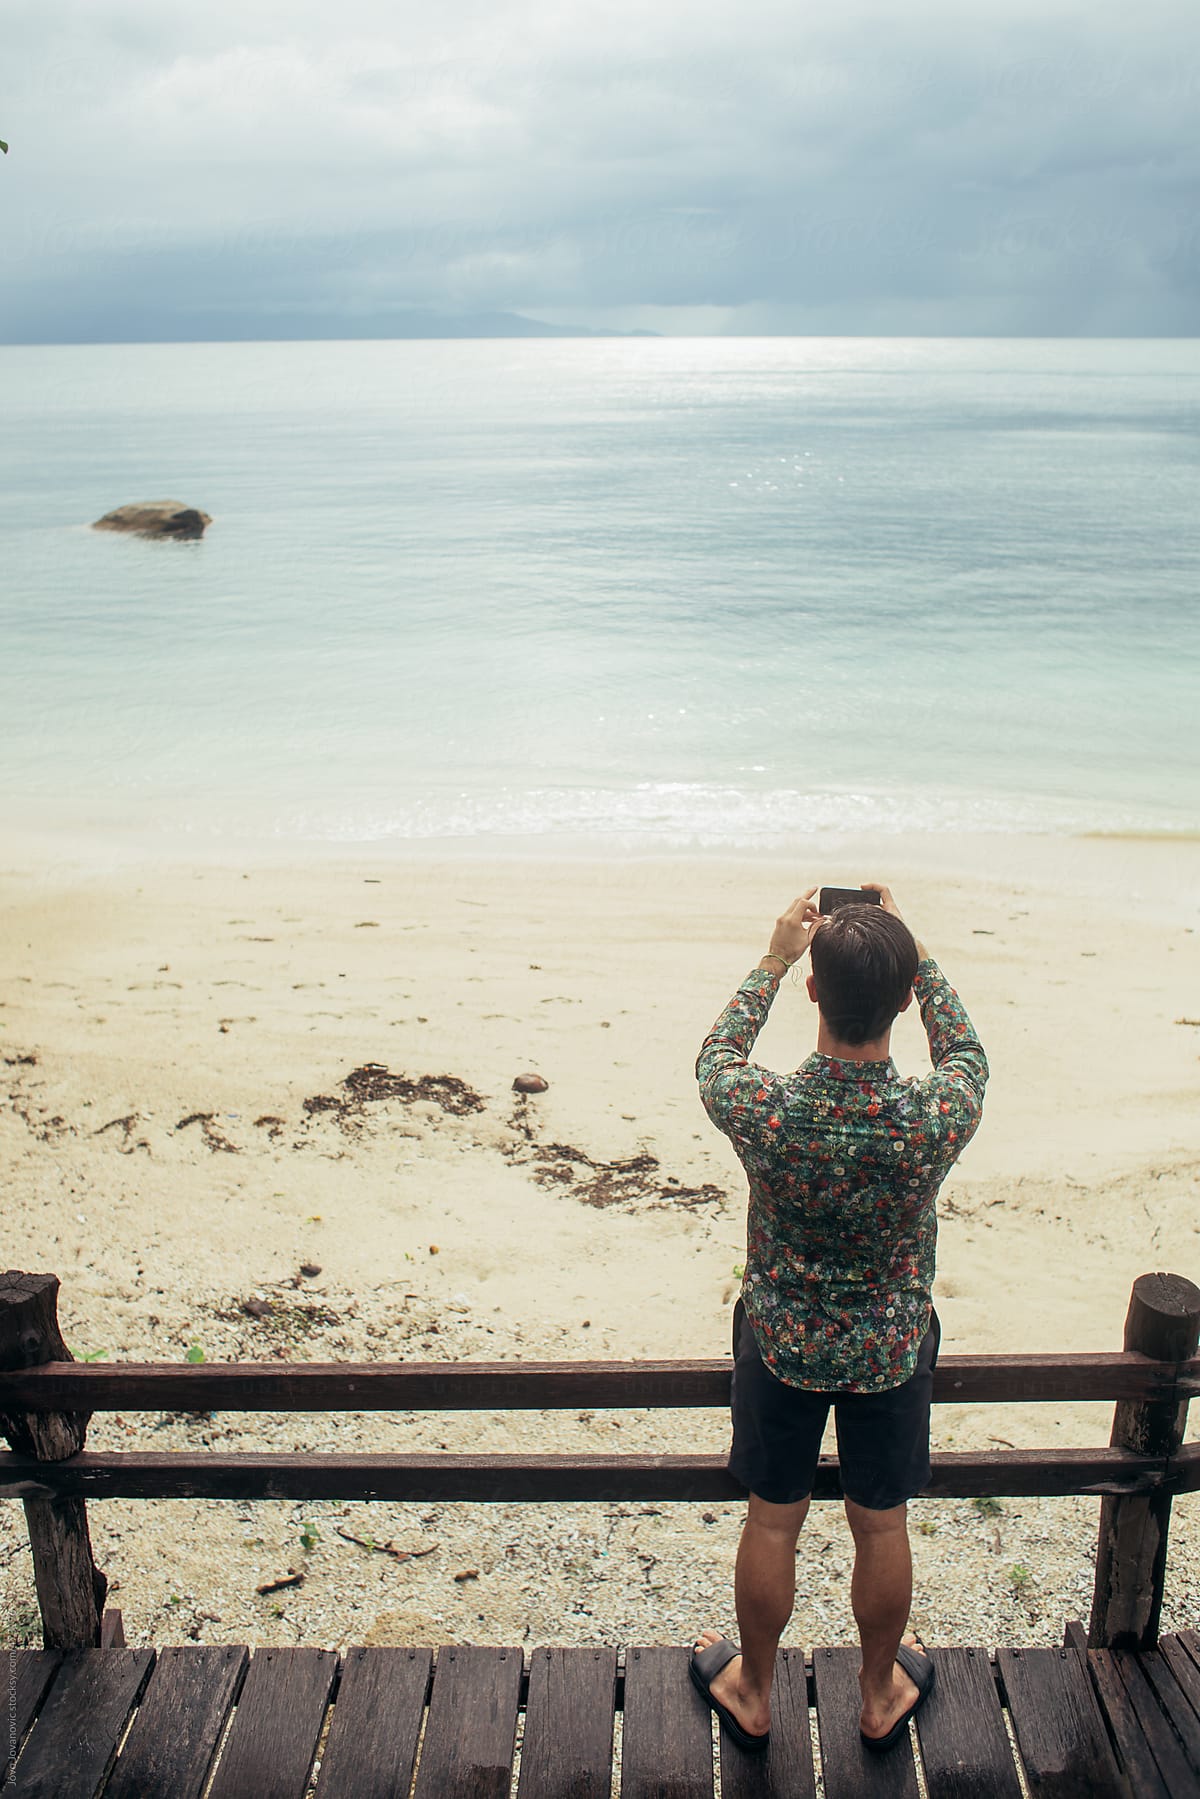 View of man from behind taking a picture of the beach